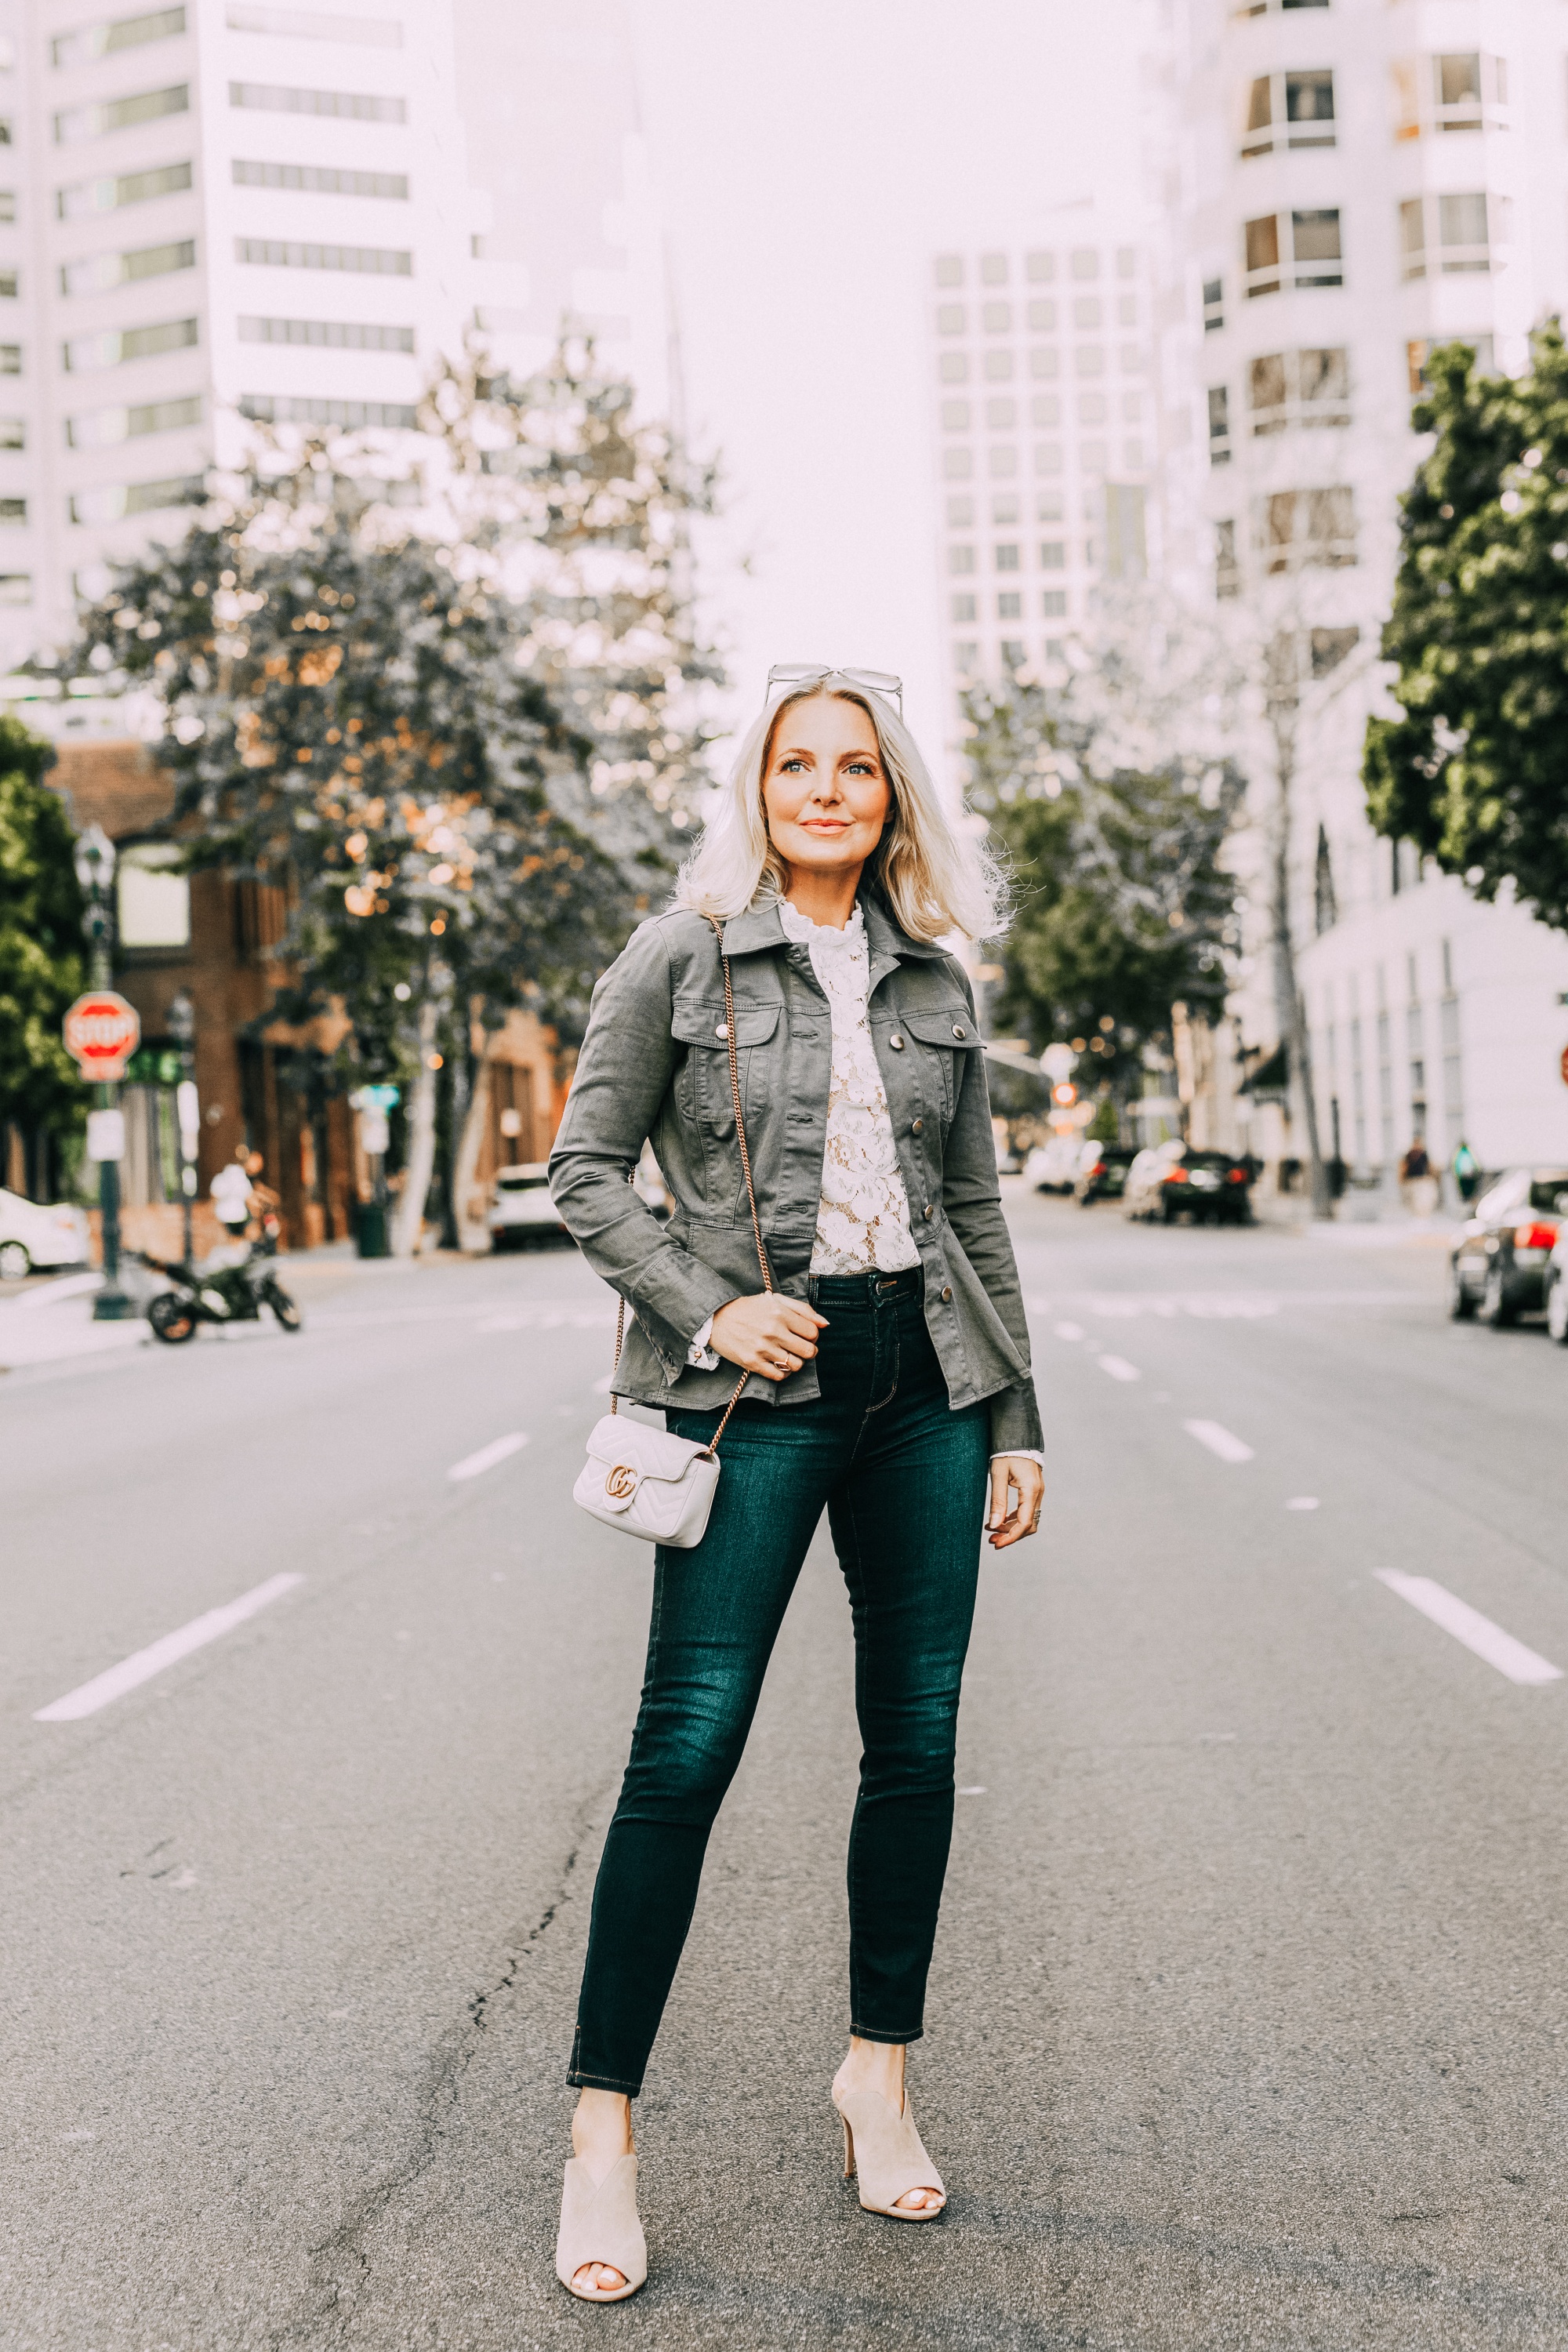 https://rstyle.me/+G549sNdFdbDQEUhaXWr8KQ, White Top Under $100, Fashion blogger Erin Busbee of BusbeeStyle.com wearing a white lace top by WAYF with dark wash skinny jeans by L'AGENCE, neutral Vince Camuto peep-toe mules, a white mini Gucci bag, and green peplum Frame jacket in San Diego, California